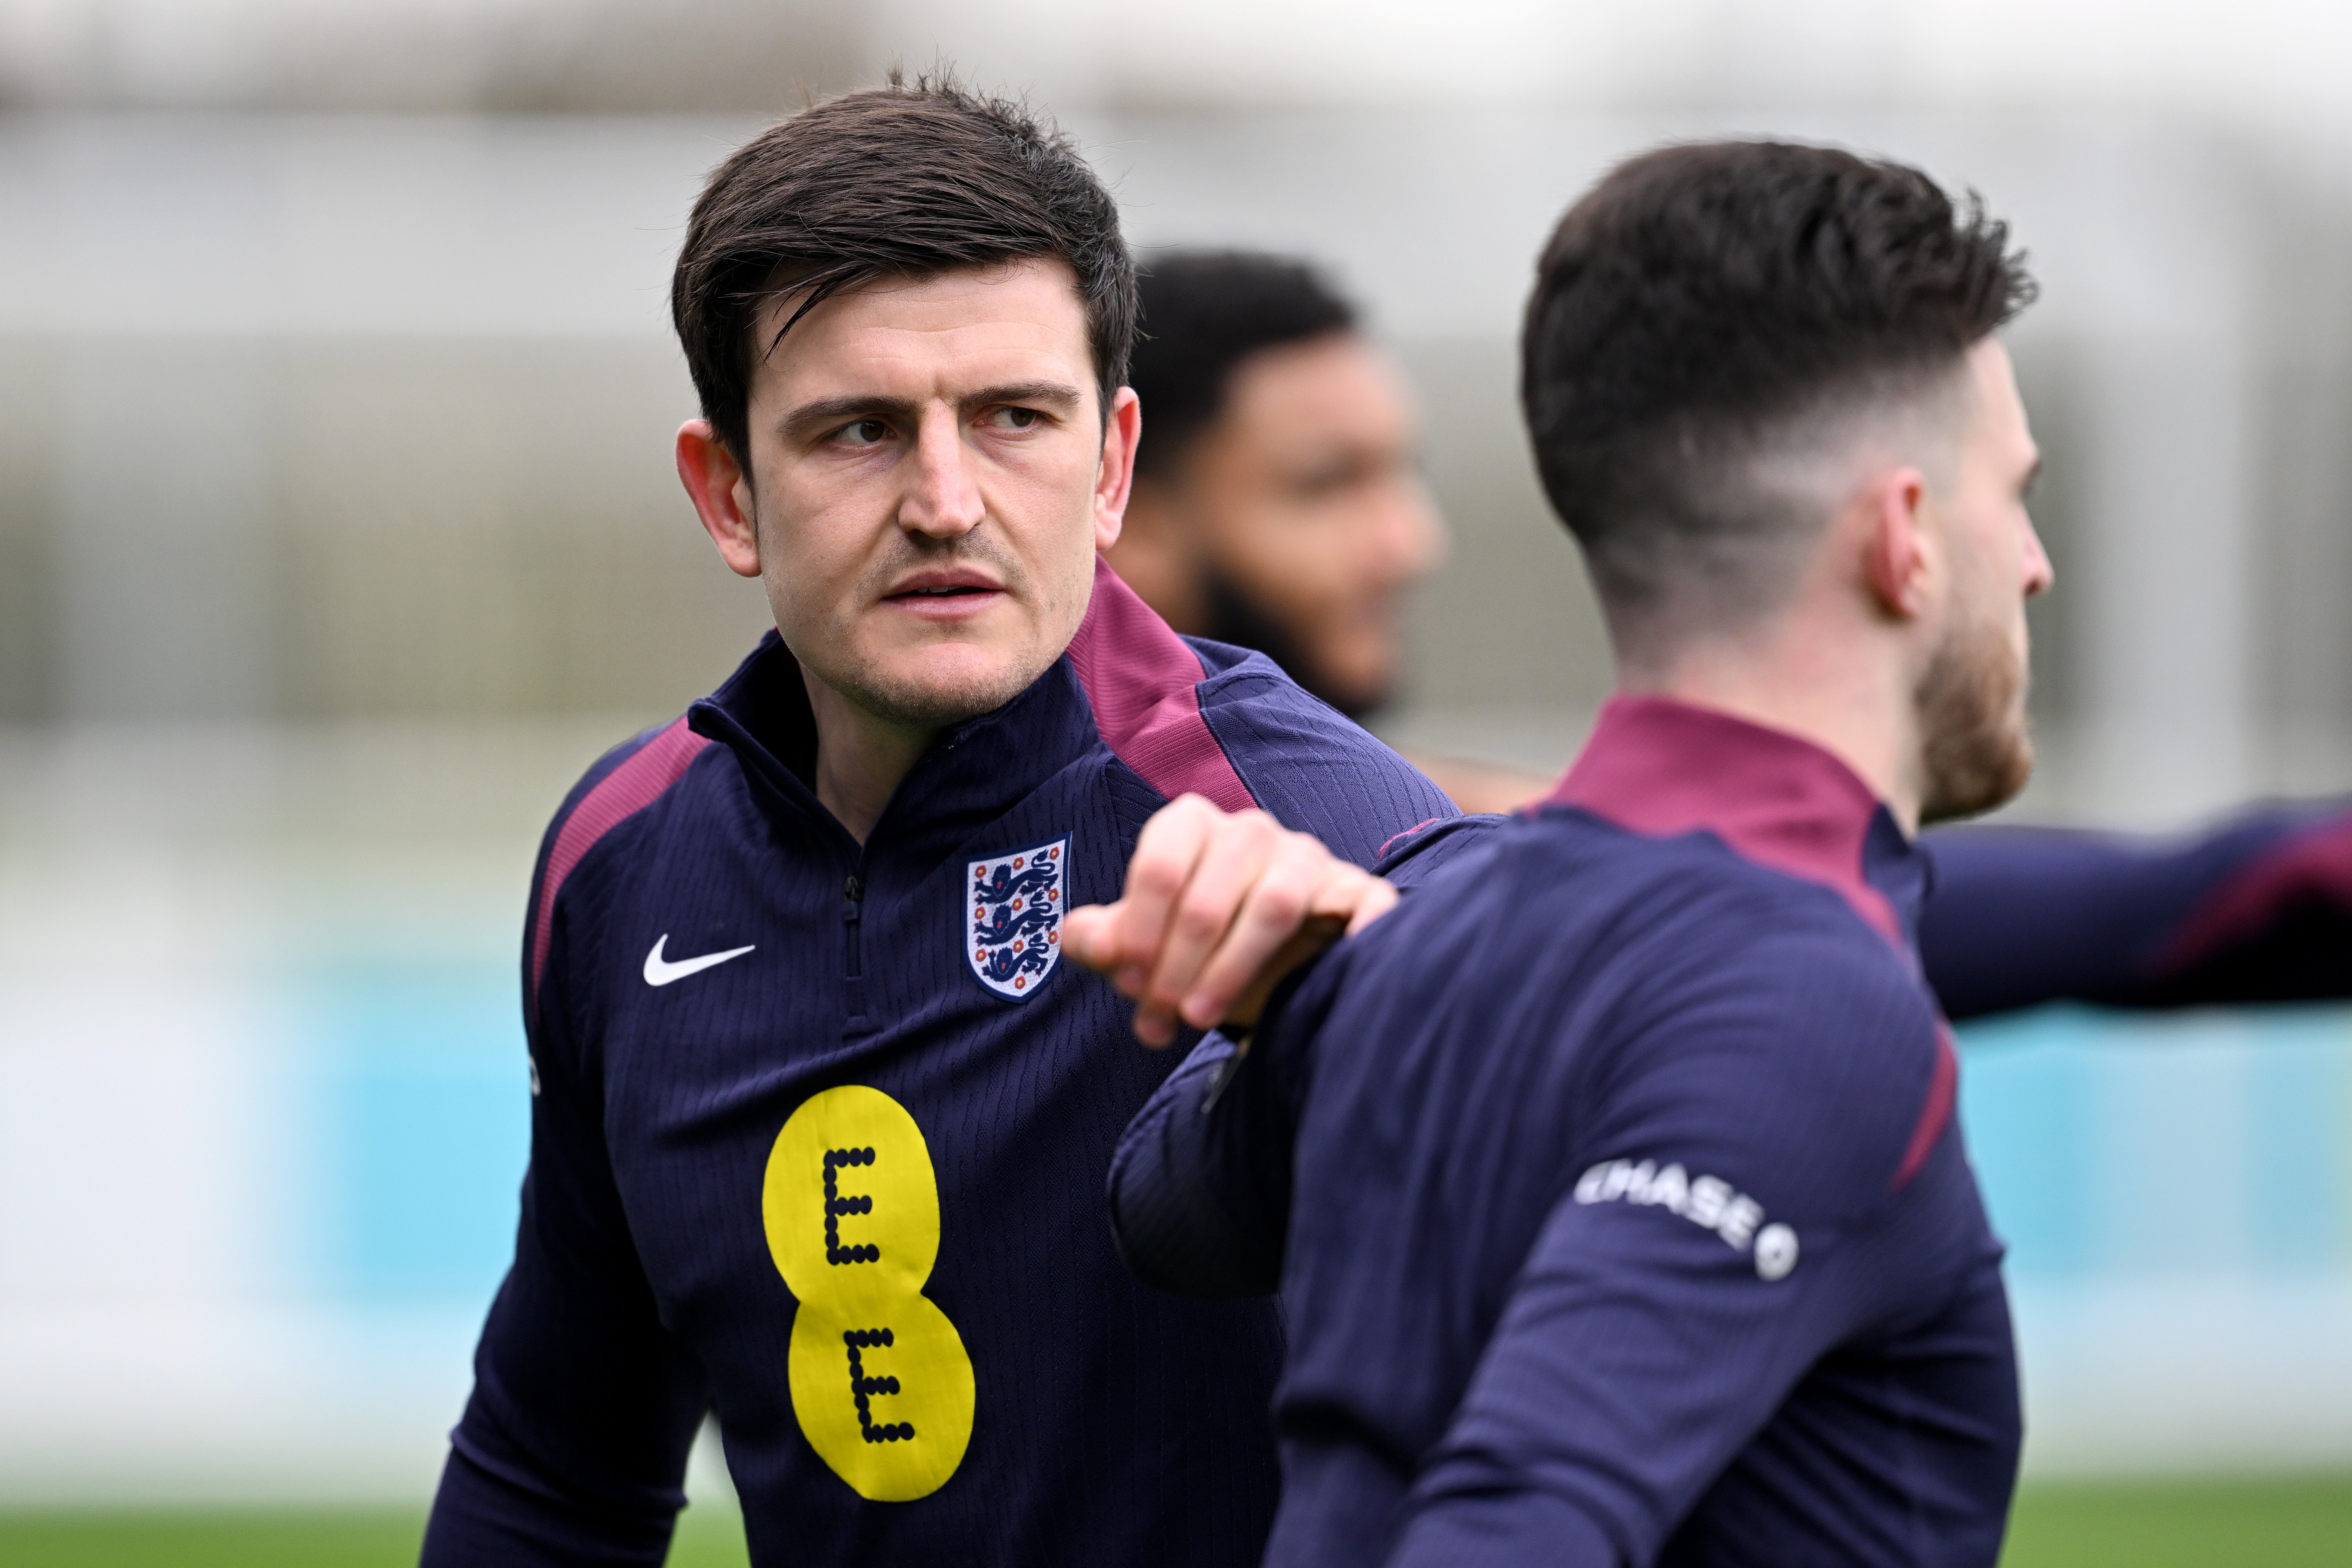 Harry Maguire warms up before training at St George’s Park this week